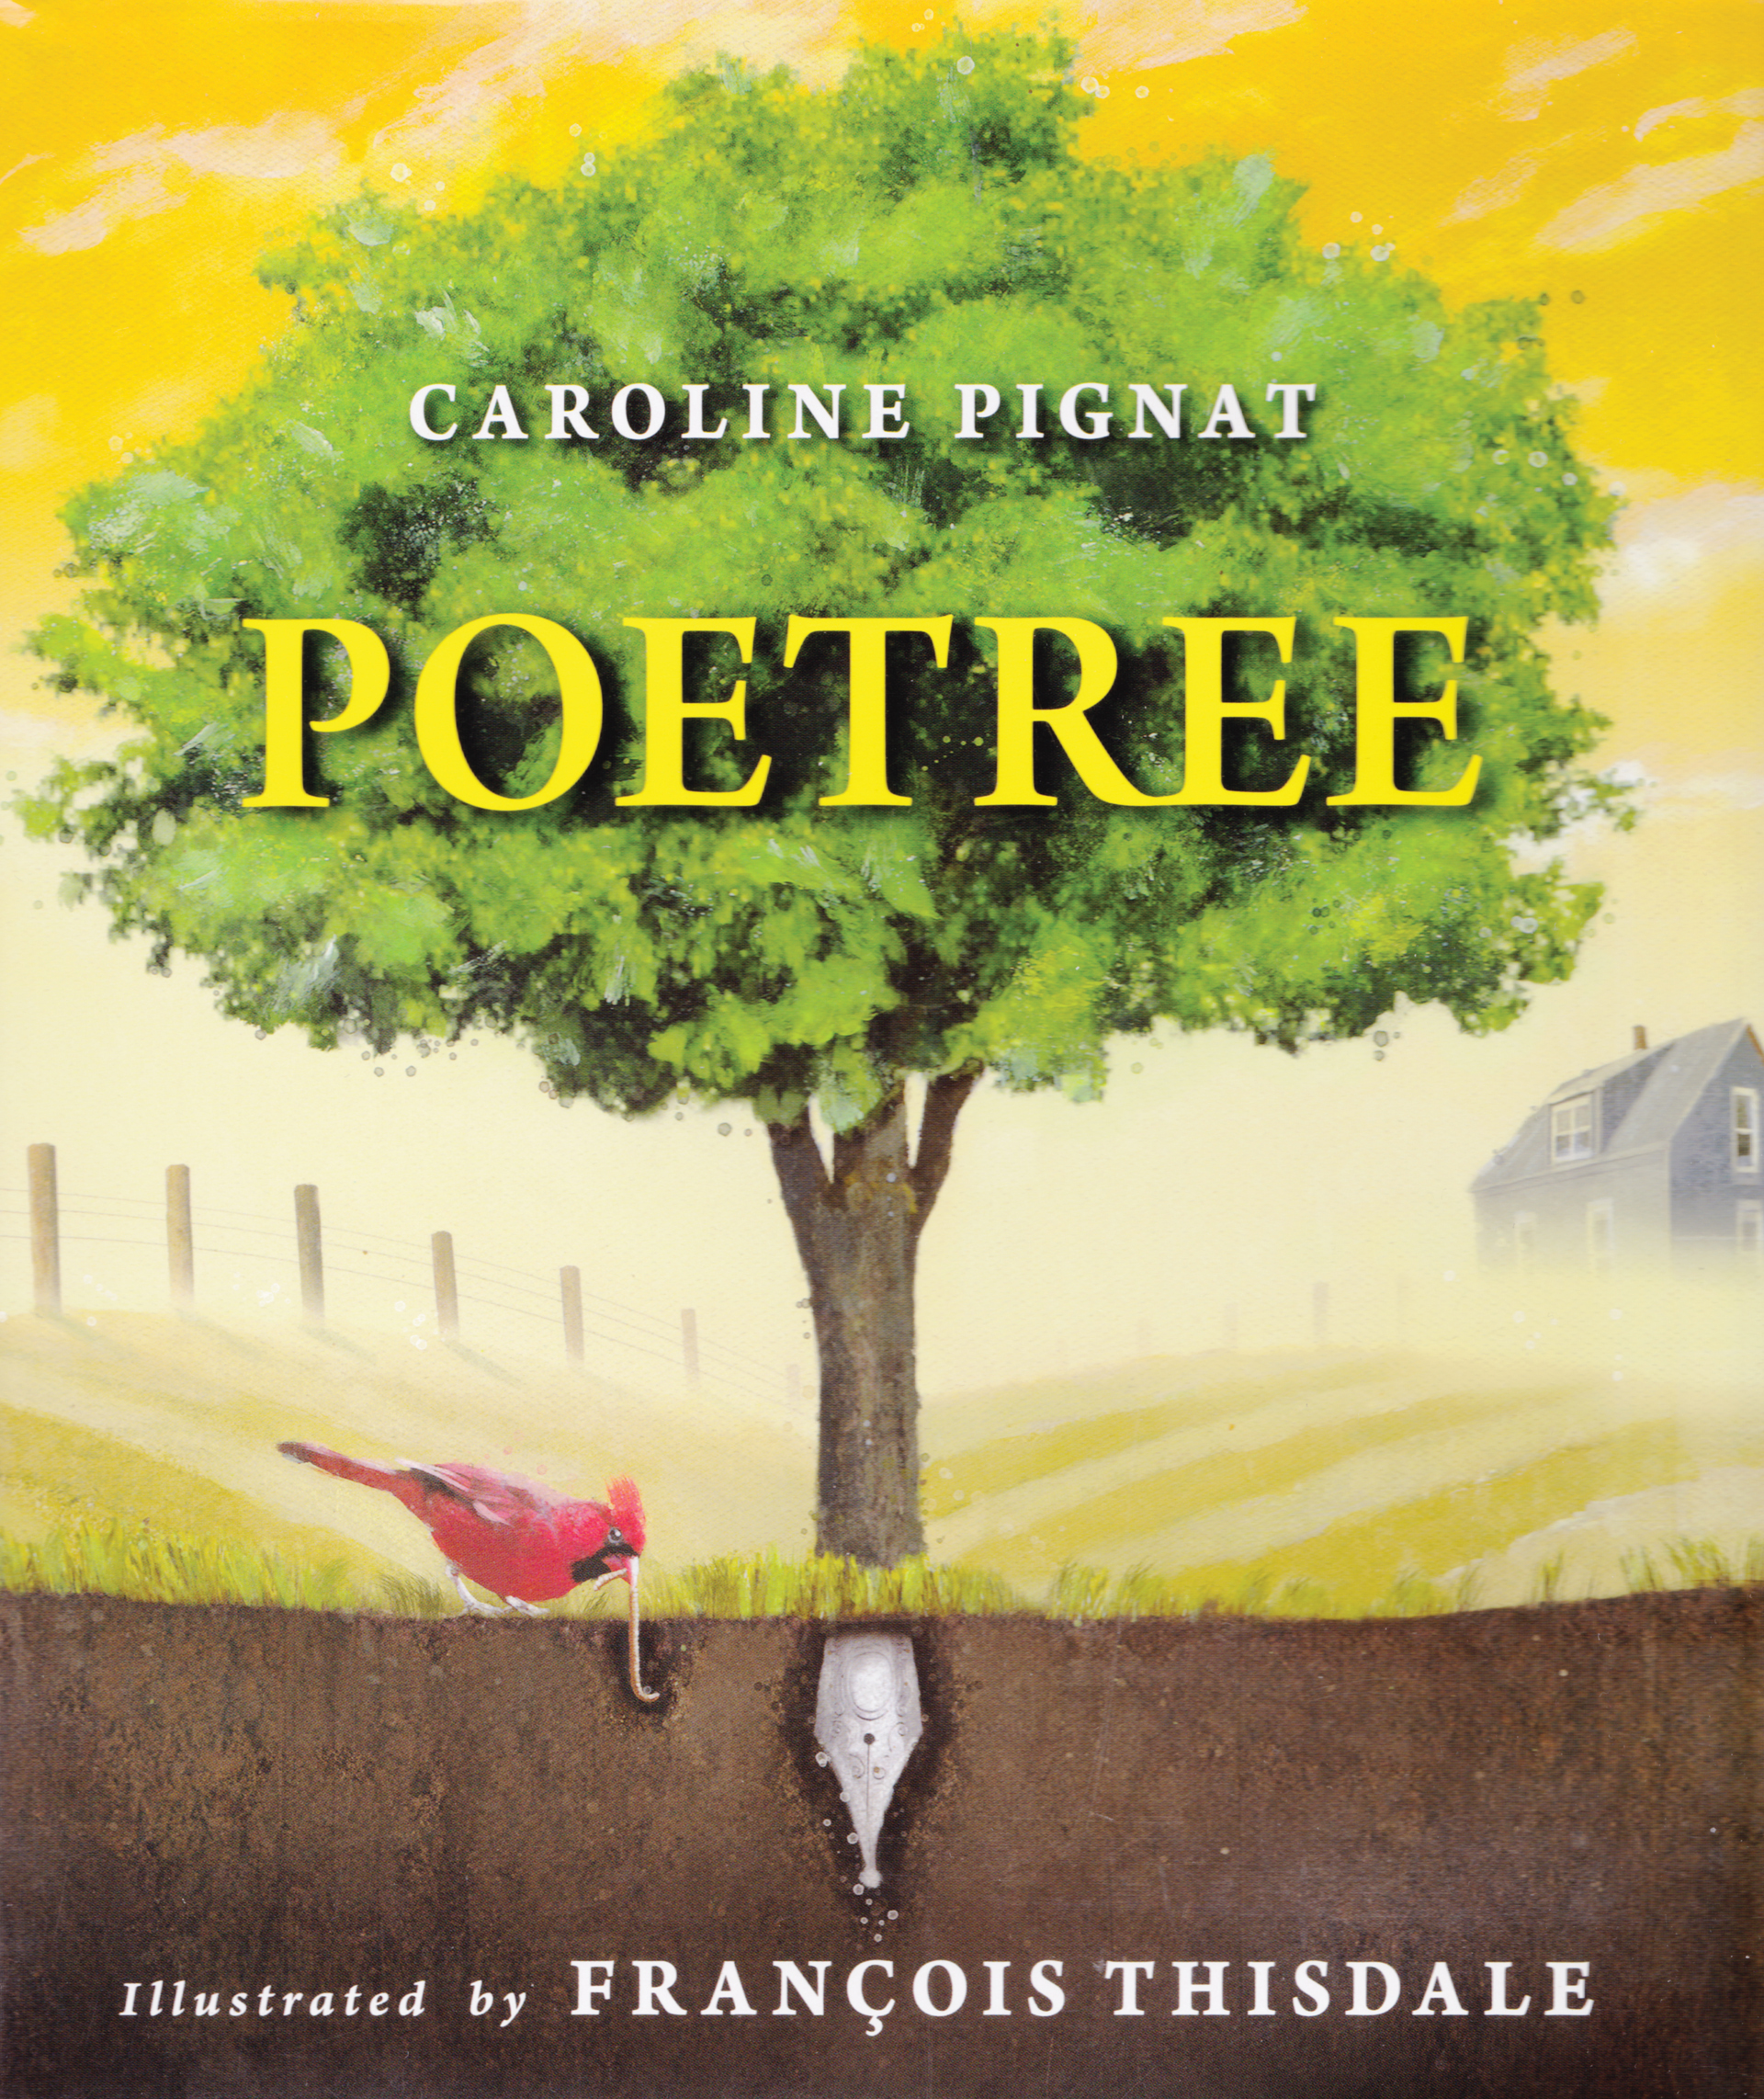 Book cover for 'Poetree.' The cover is a large tree with a bird in front, grabbing a worm with its beak.